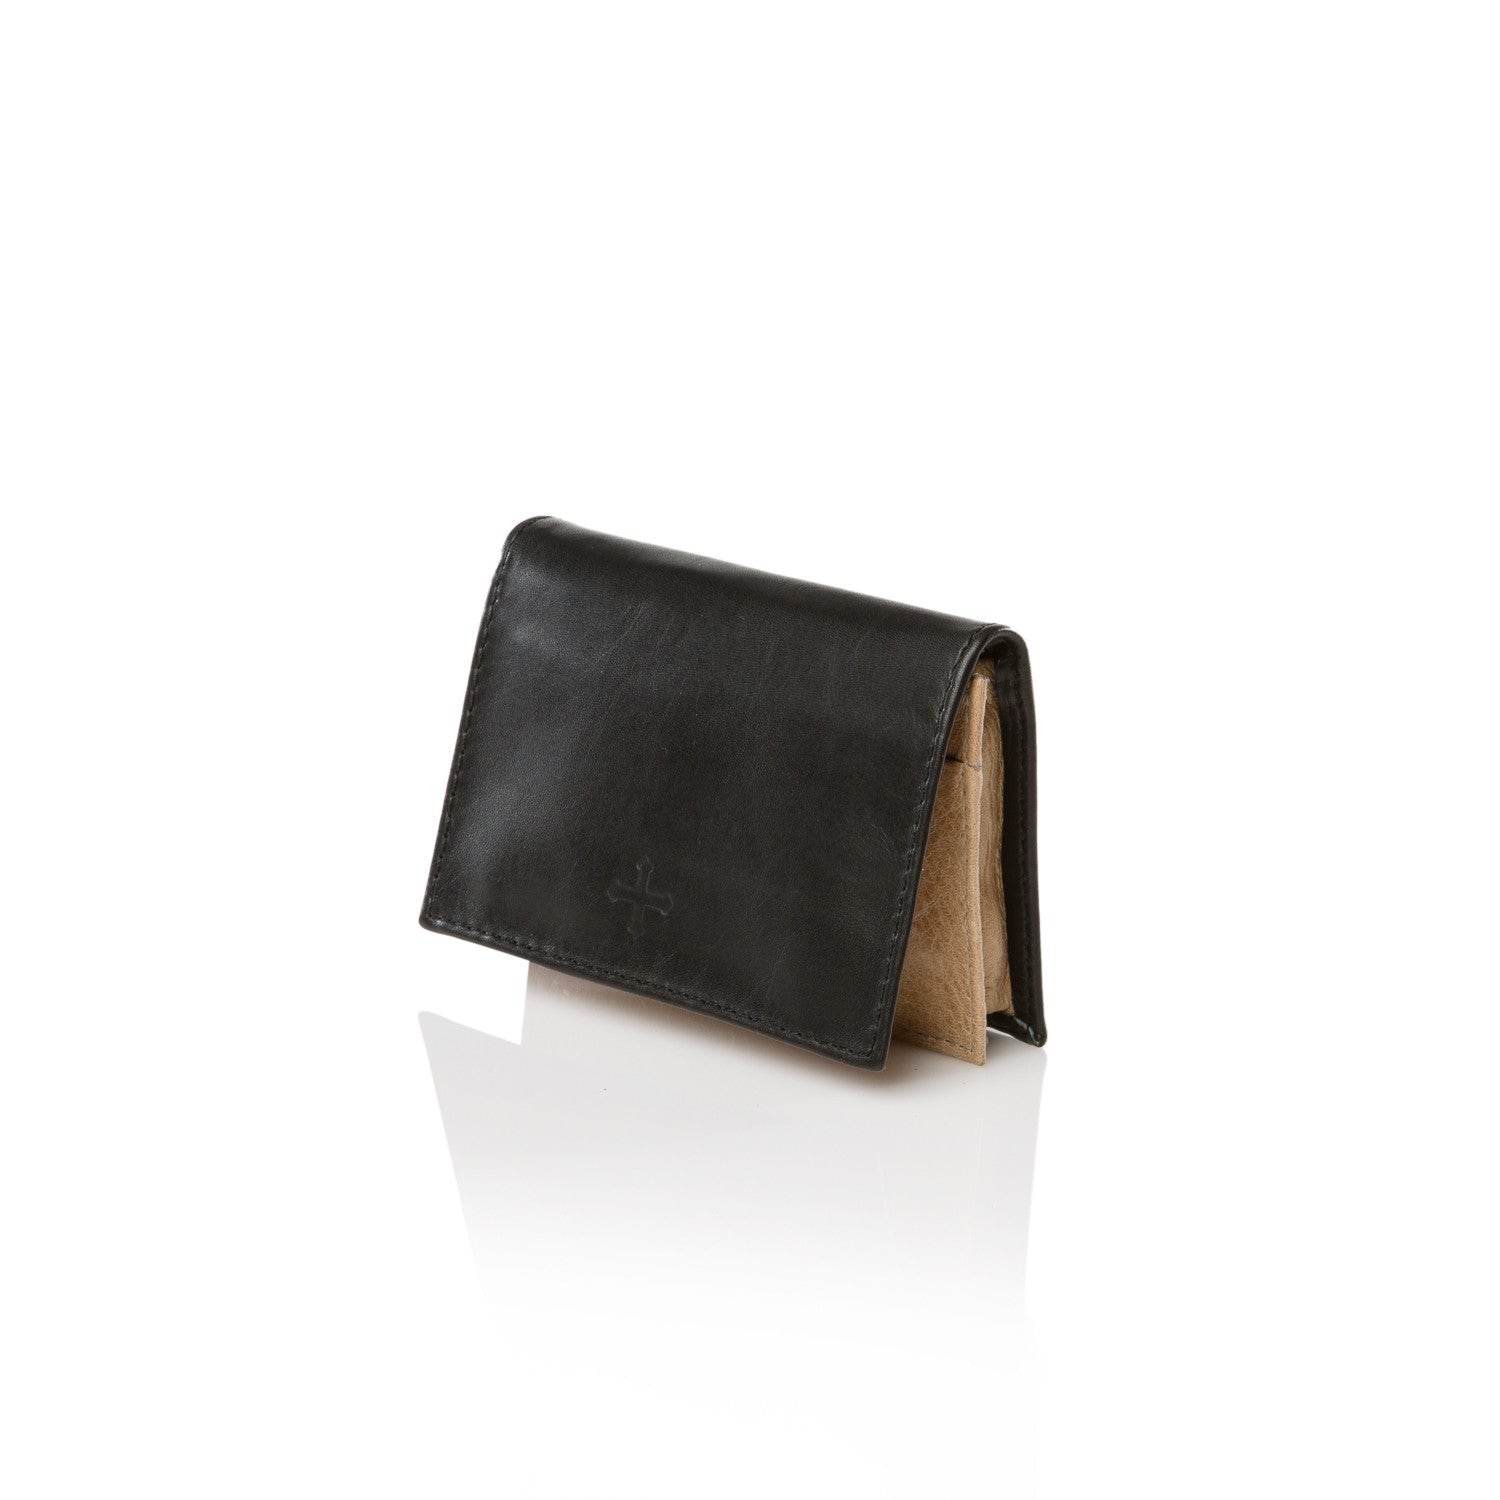 MASSSIMO DUTTI Double card holder in two-tone brown and…